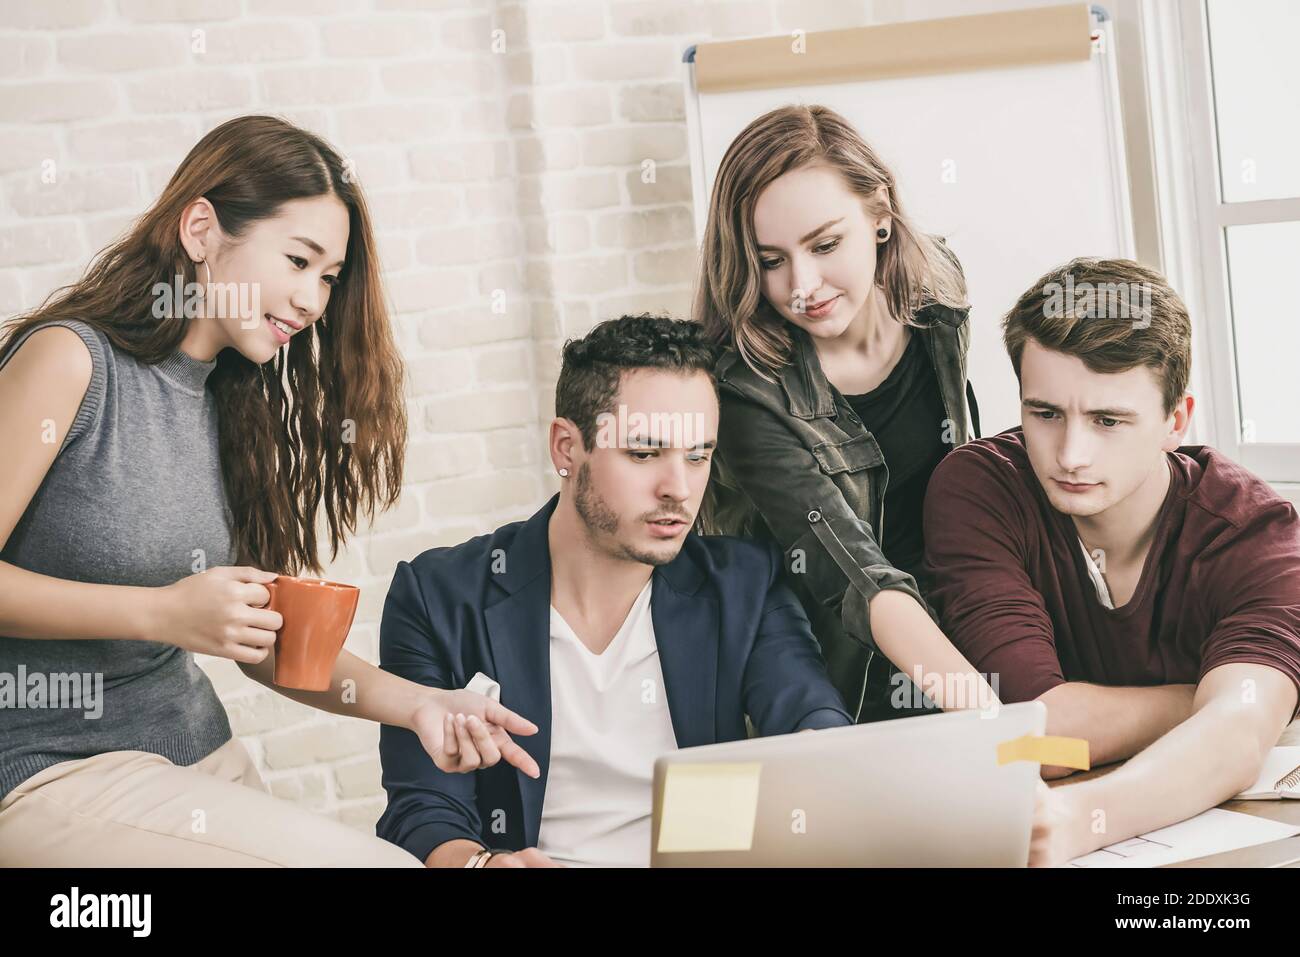 Young casual designer team discussing project group work in office meeting space Stock Photo